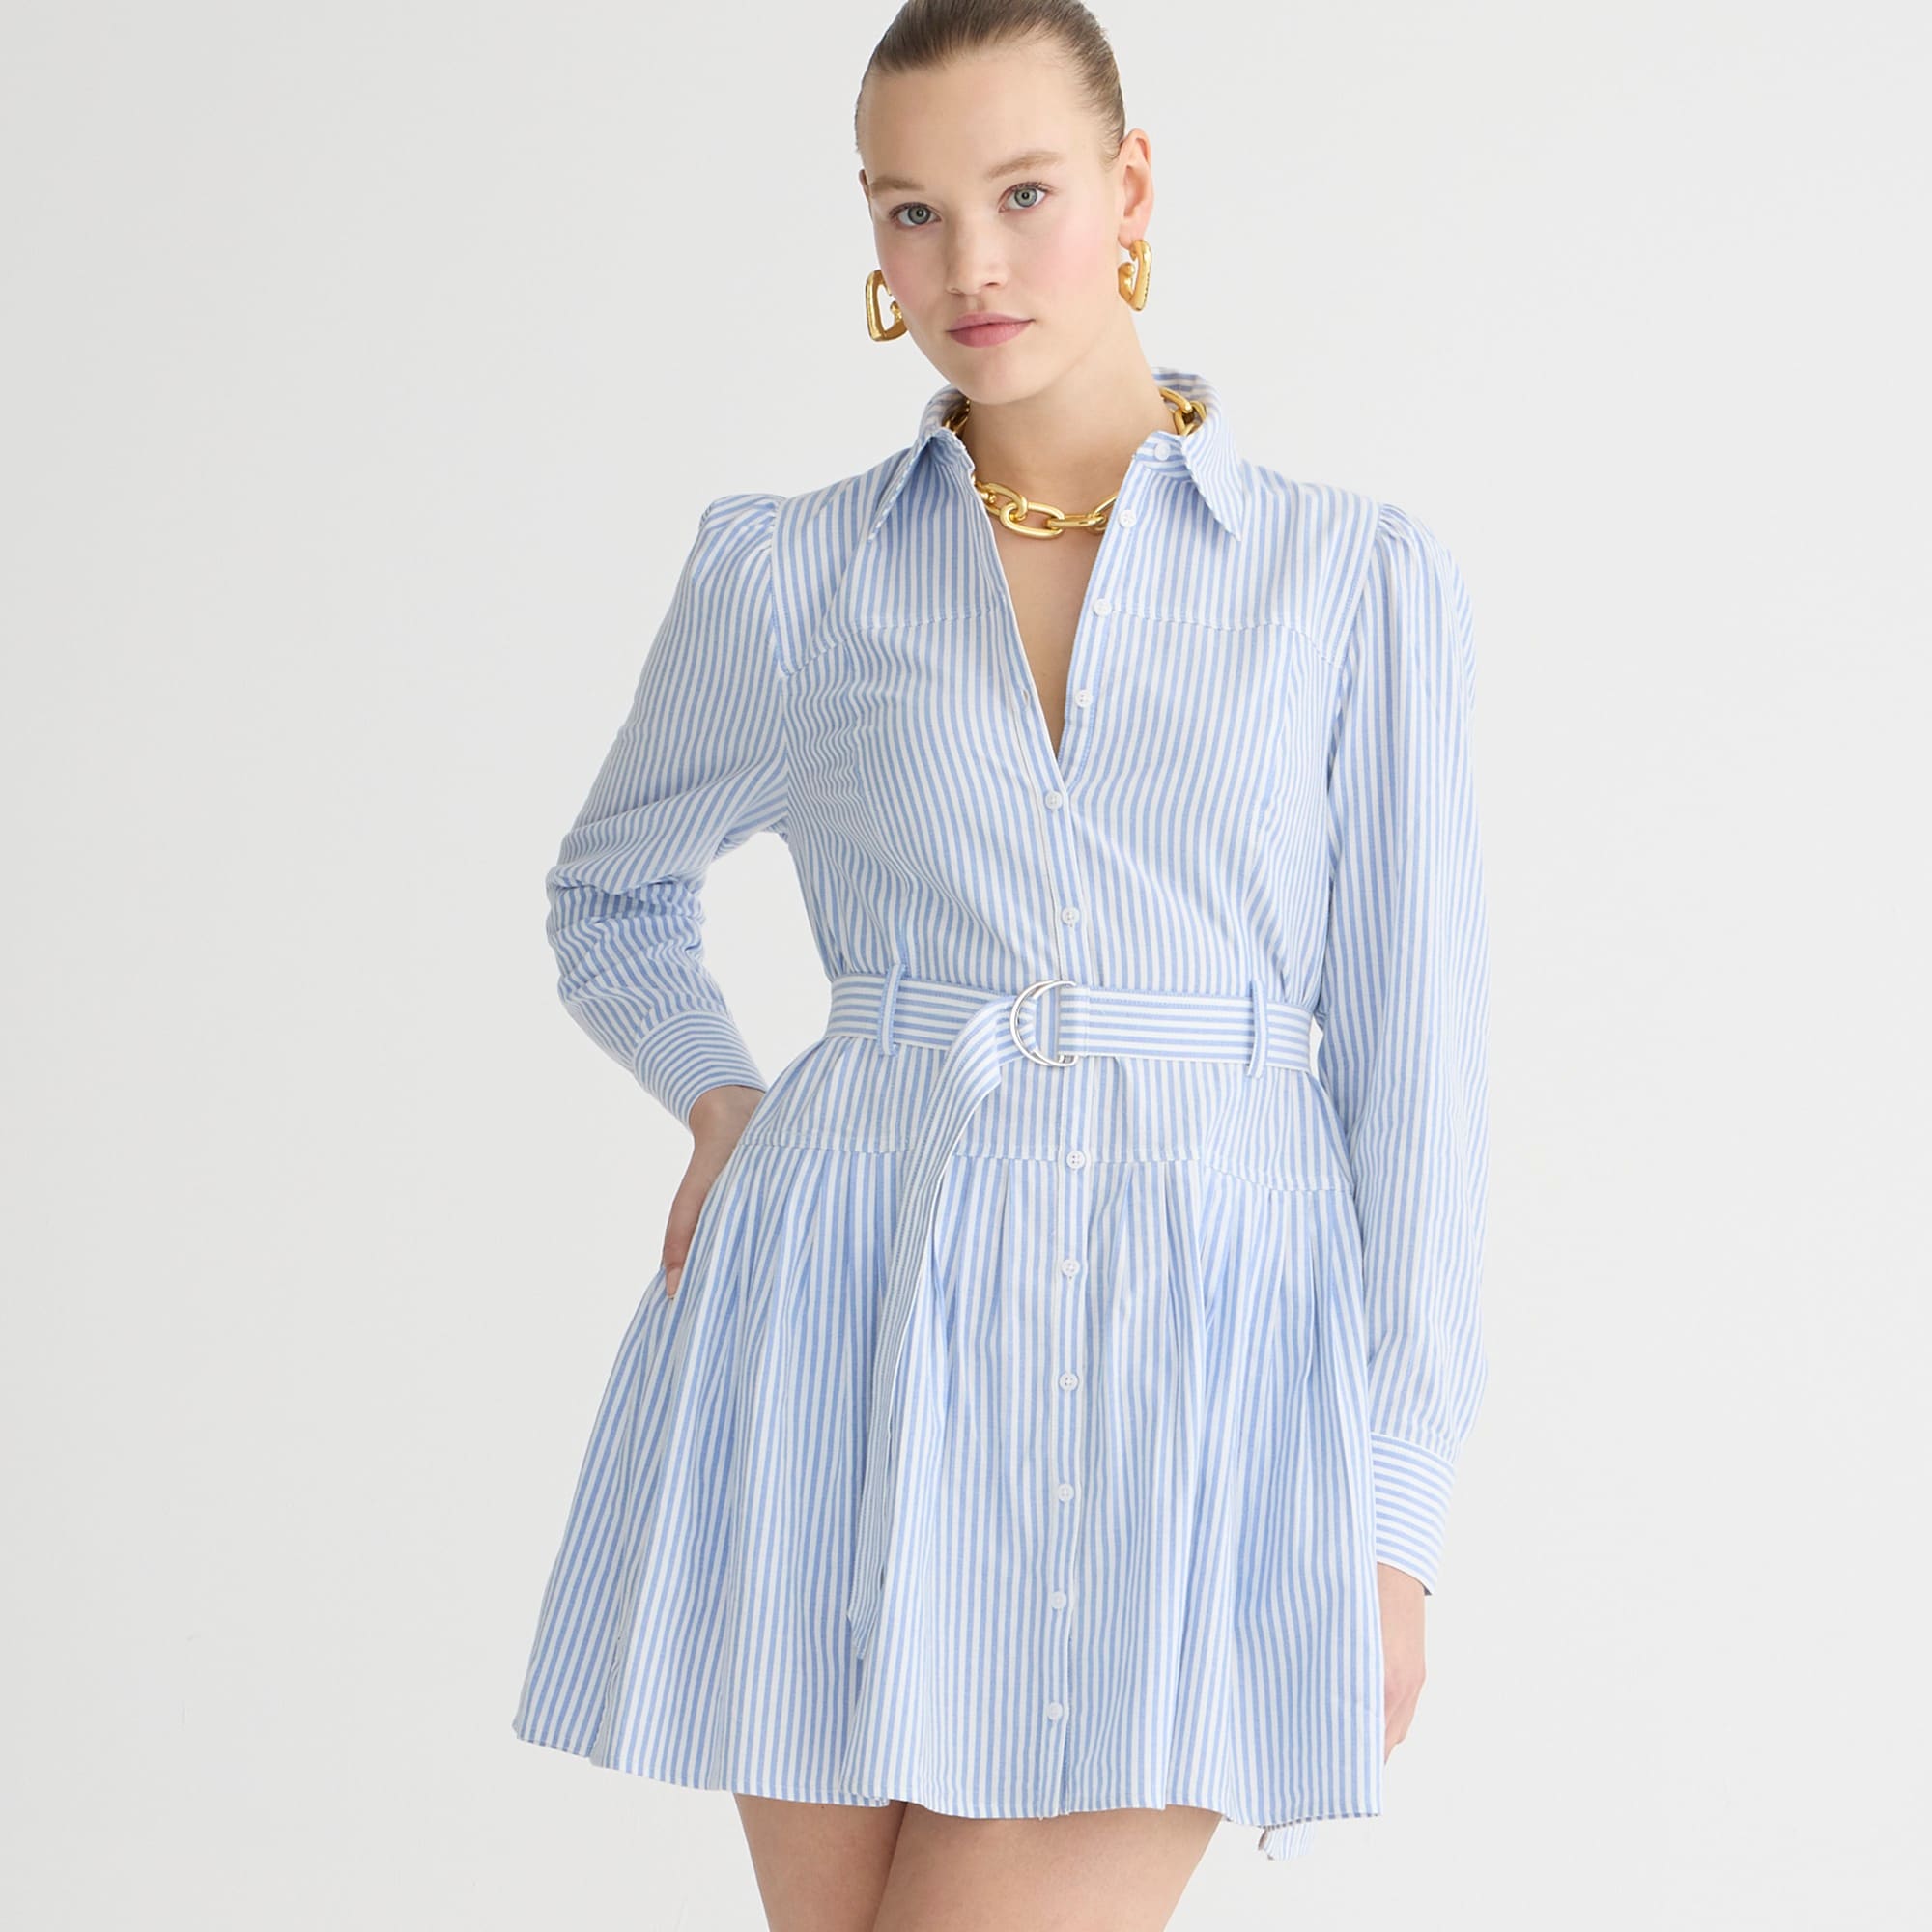 womens Fit-and-flare shirtdress in striped lightweight oxford